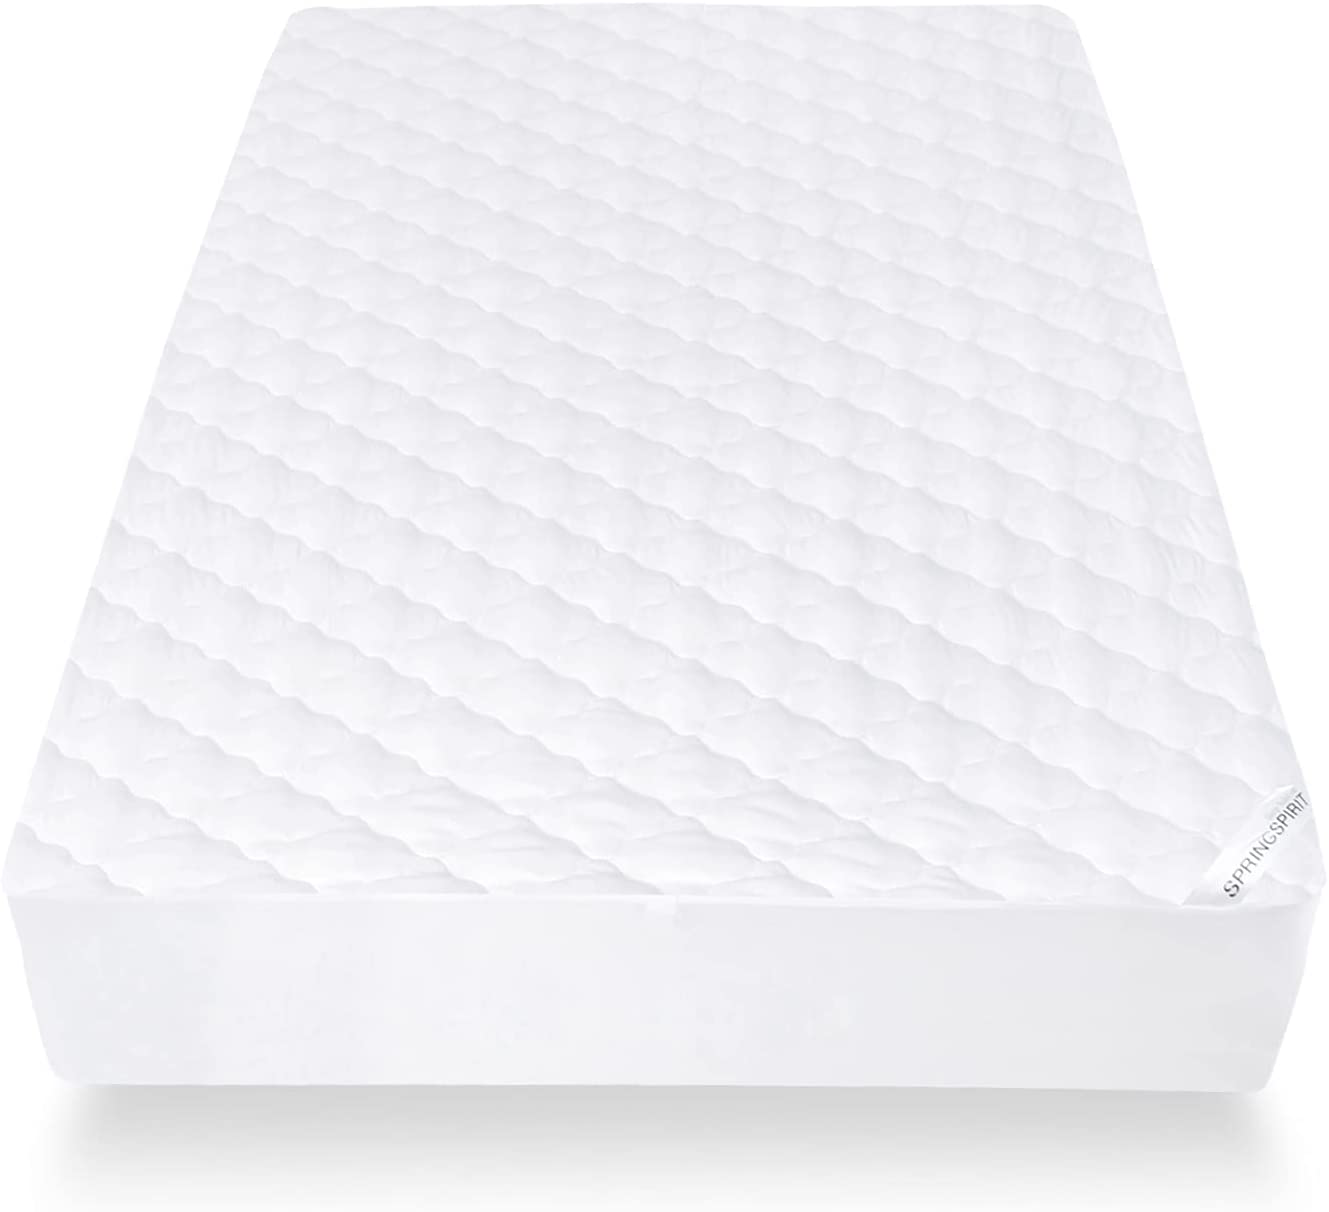 SPRINGSPIRIT Twin XL Mattress Protector Waterproof, Breathable & Machine Washable Twin XL Mattress Pad Cover Quilted Fitted with Deep Pocket up to 14" Depth (39"x 80")